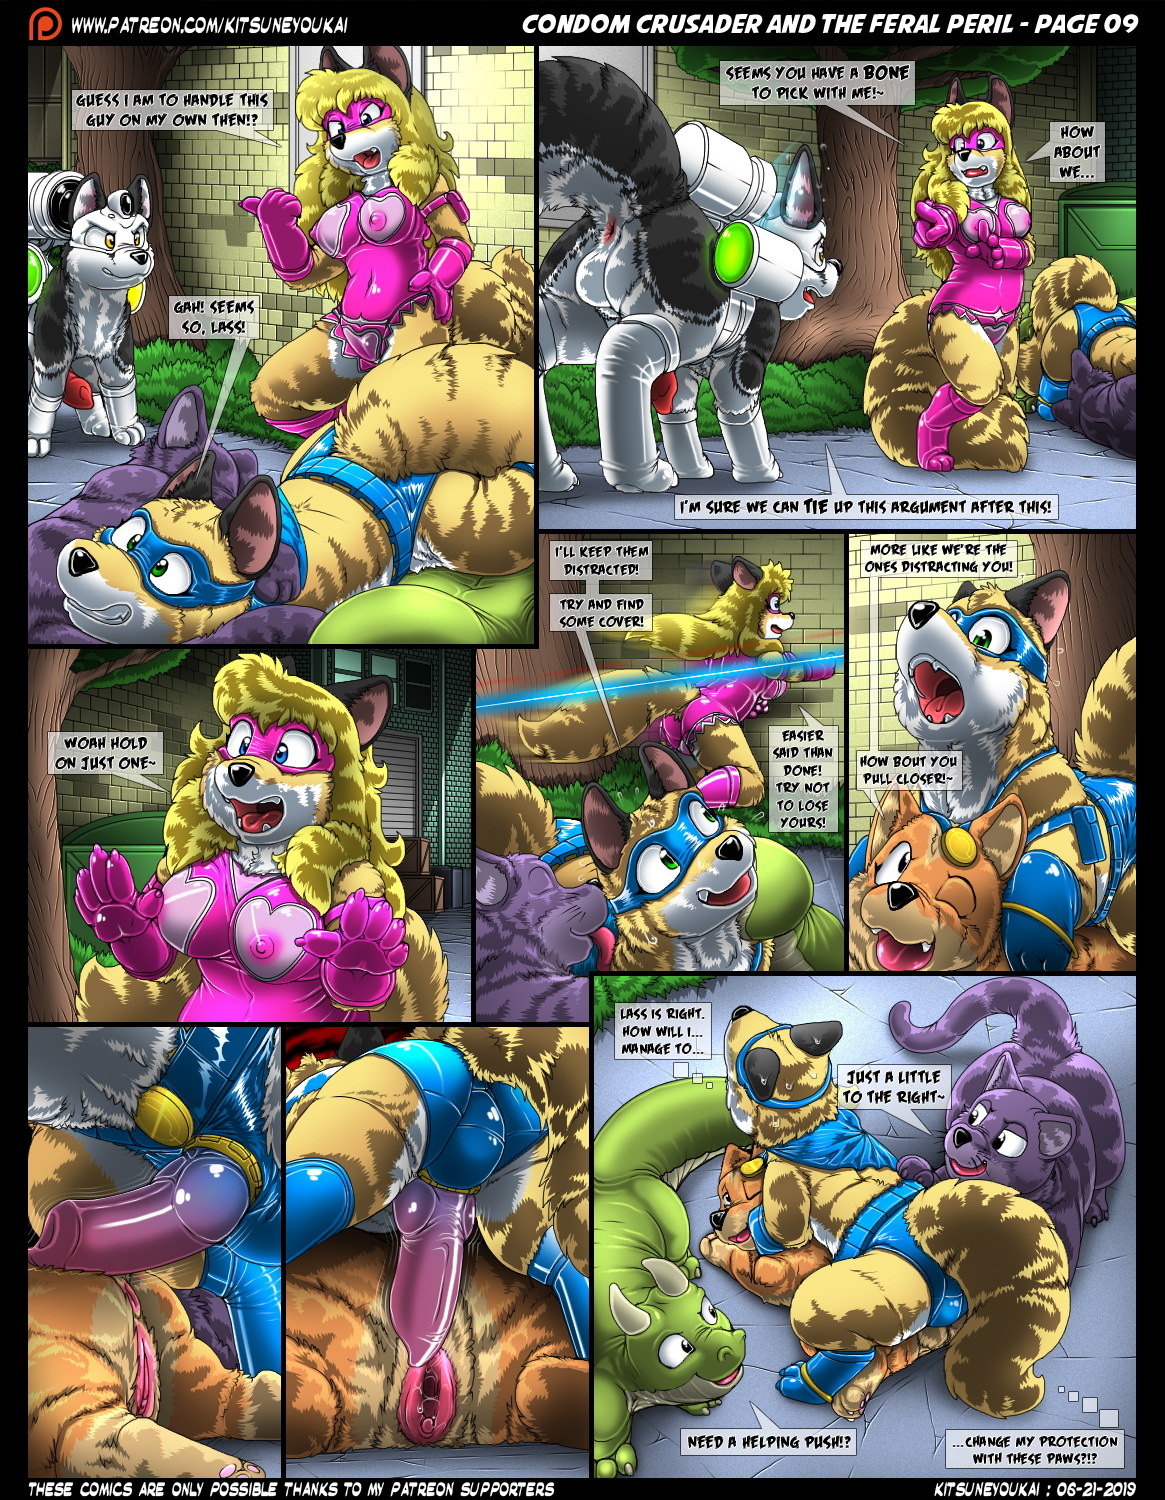 Condom Crusader and the Feral Peril - Page 9